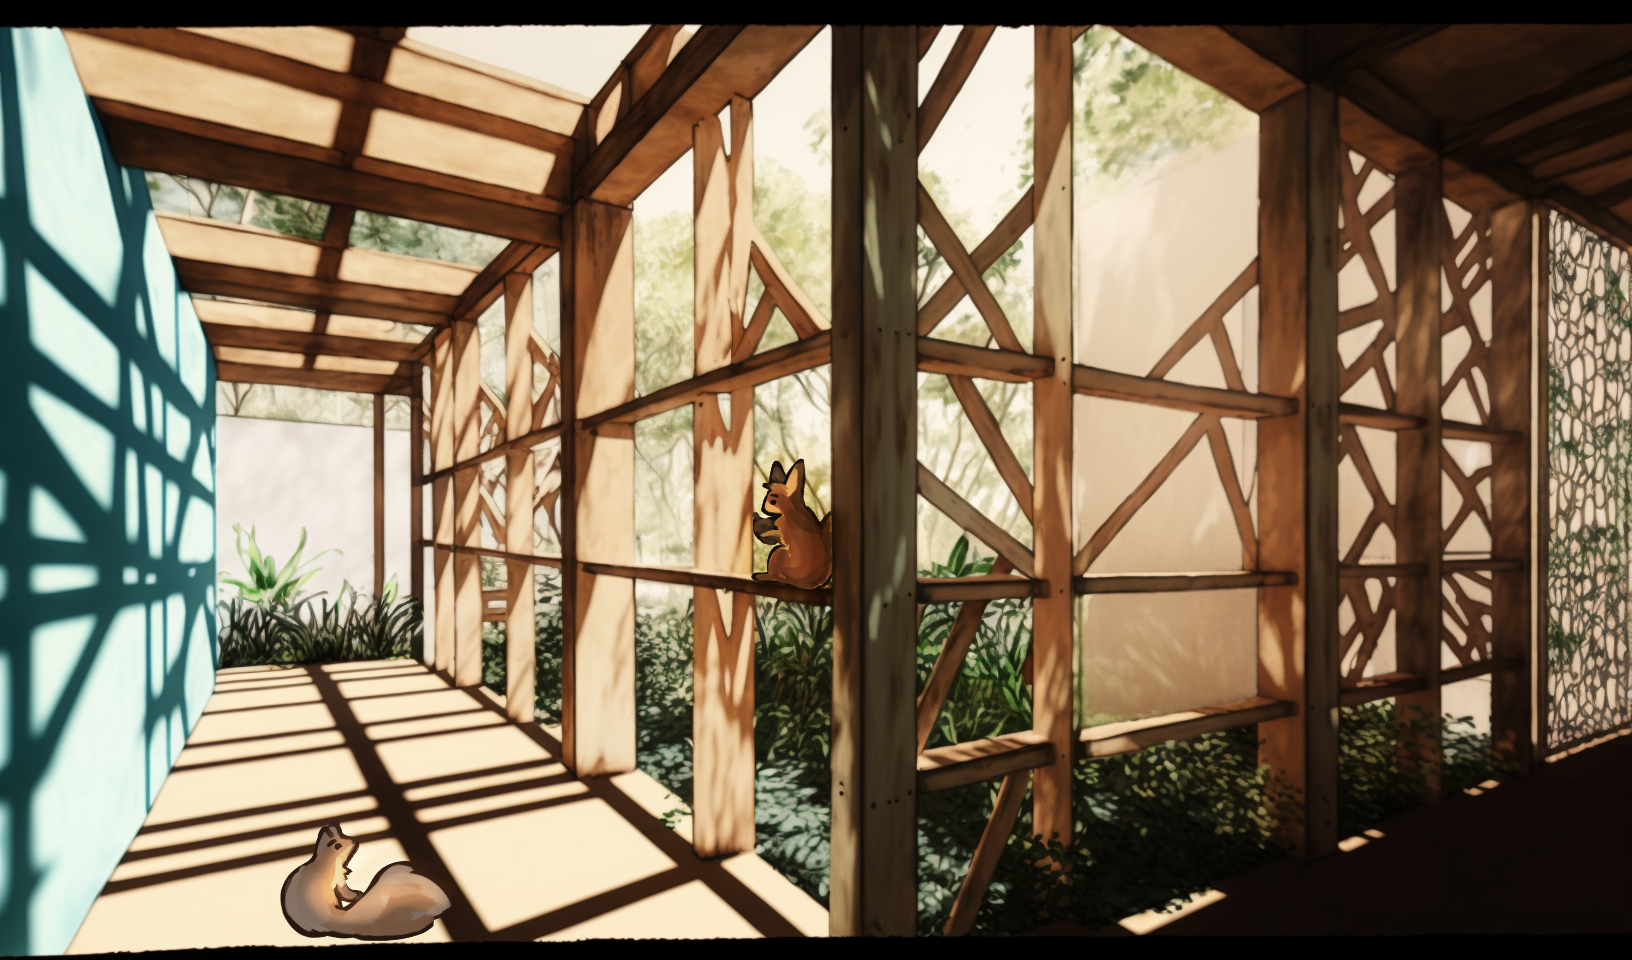 Interior of space with wooden structure, natural light and a squirrel.